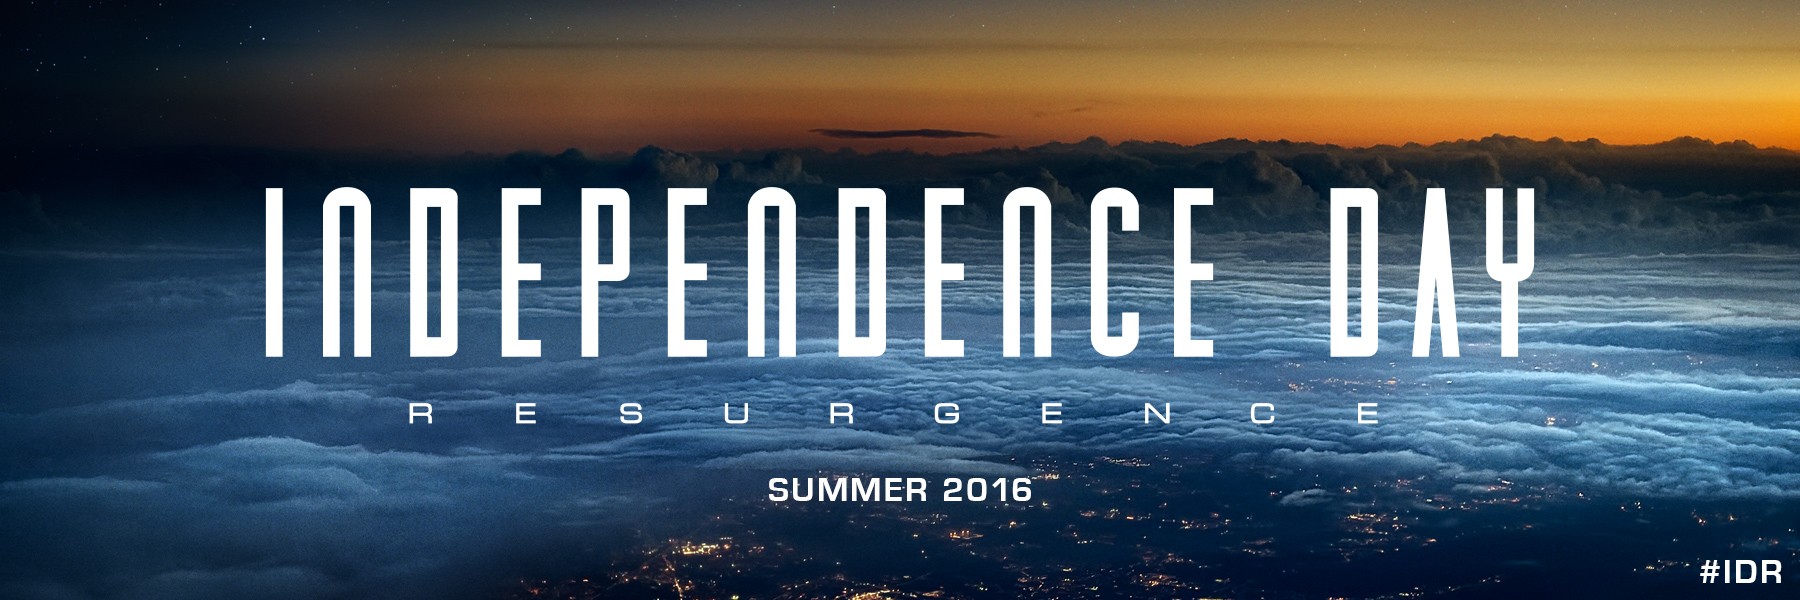 independence-day-film-header-front-main-stage-1.jpg